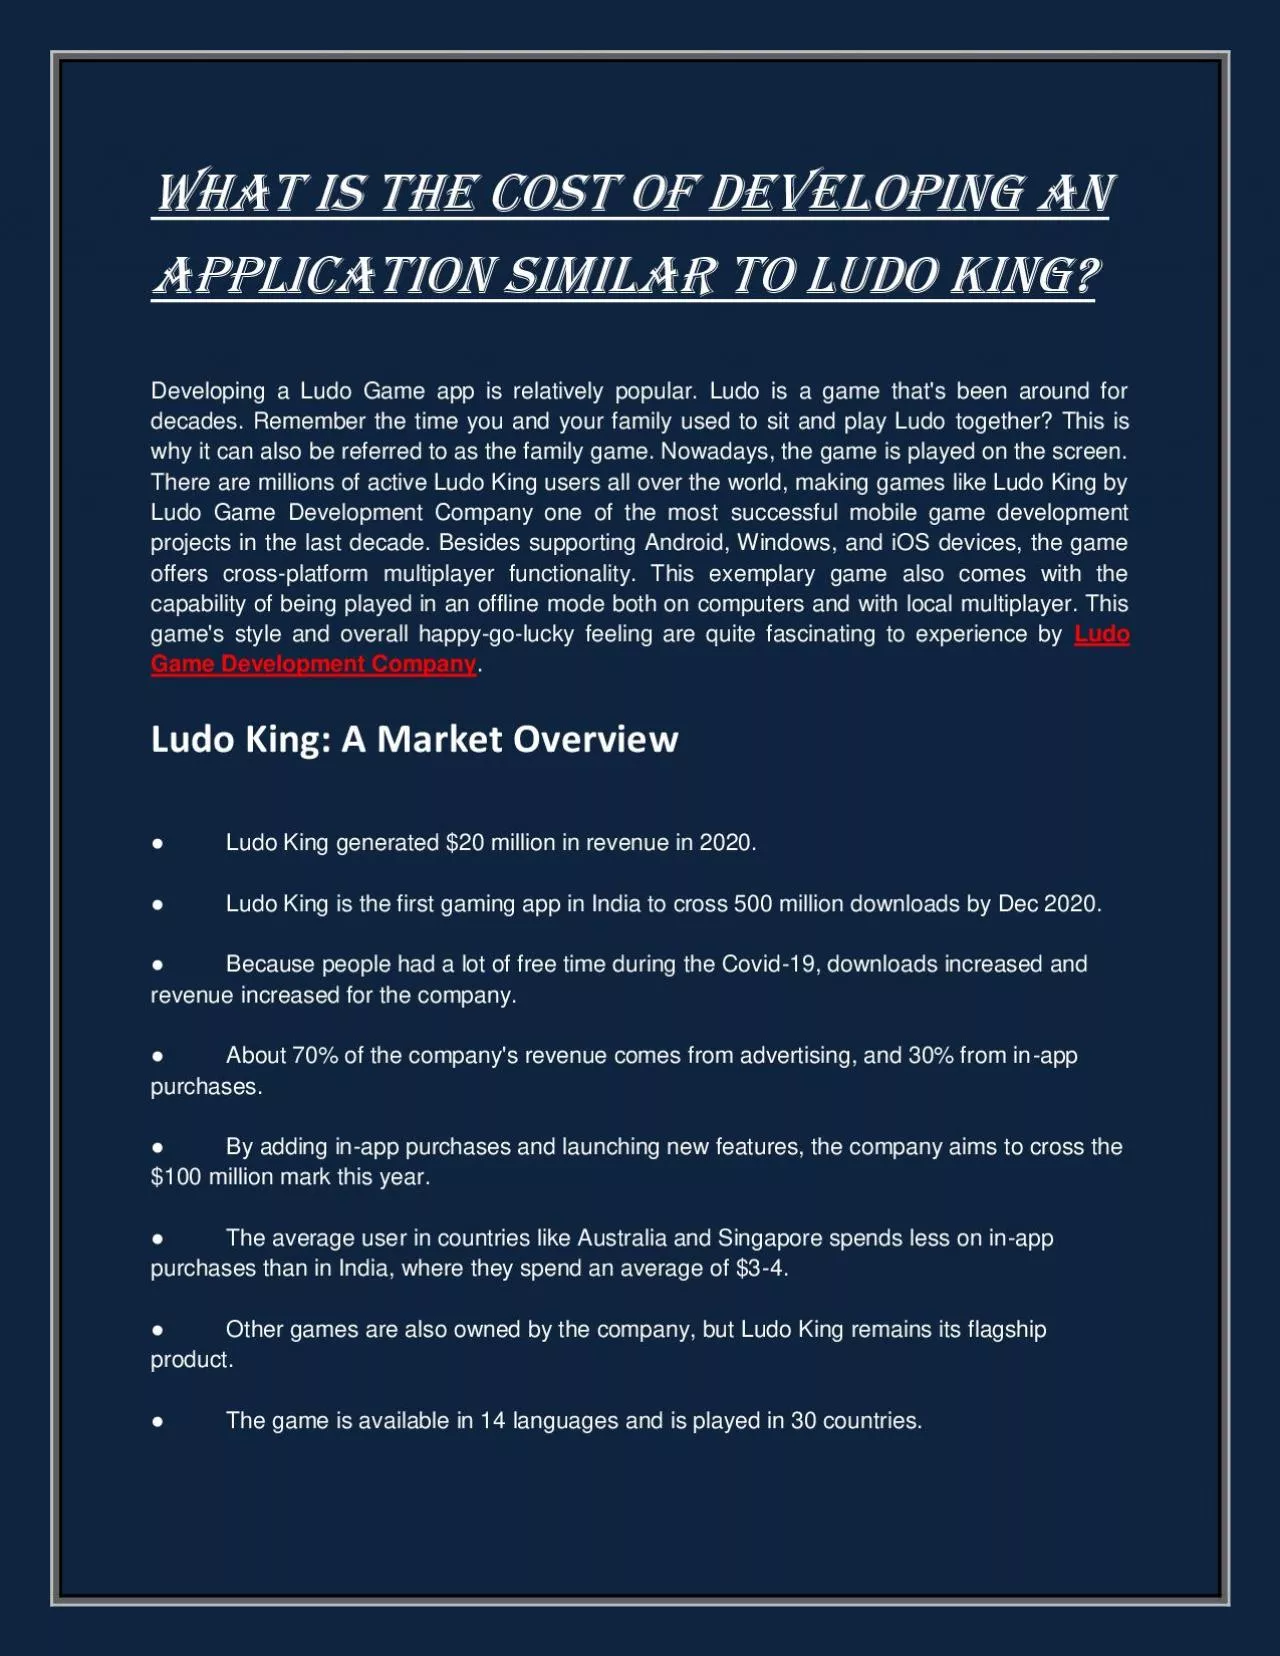 What Is The Cost Of Developing An Application Similar To Ludo King?